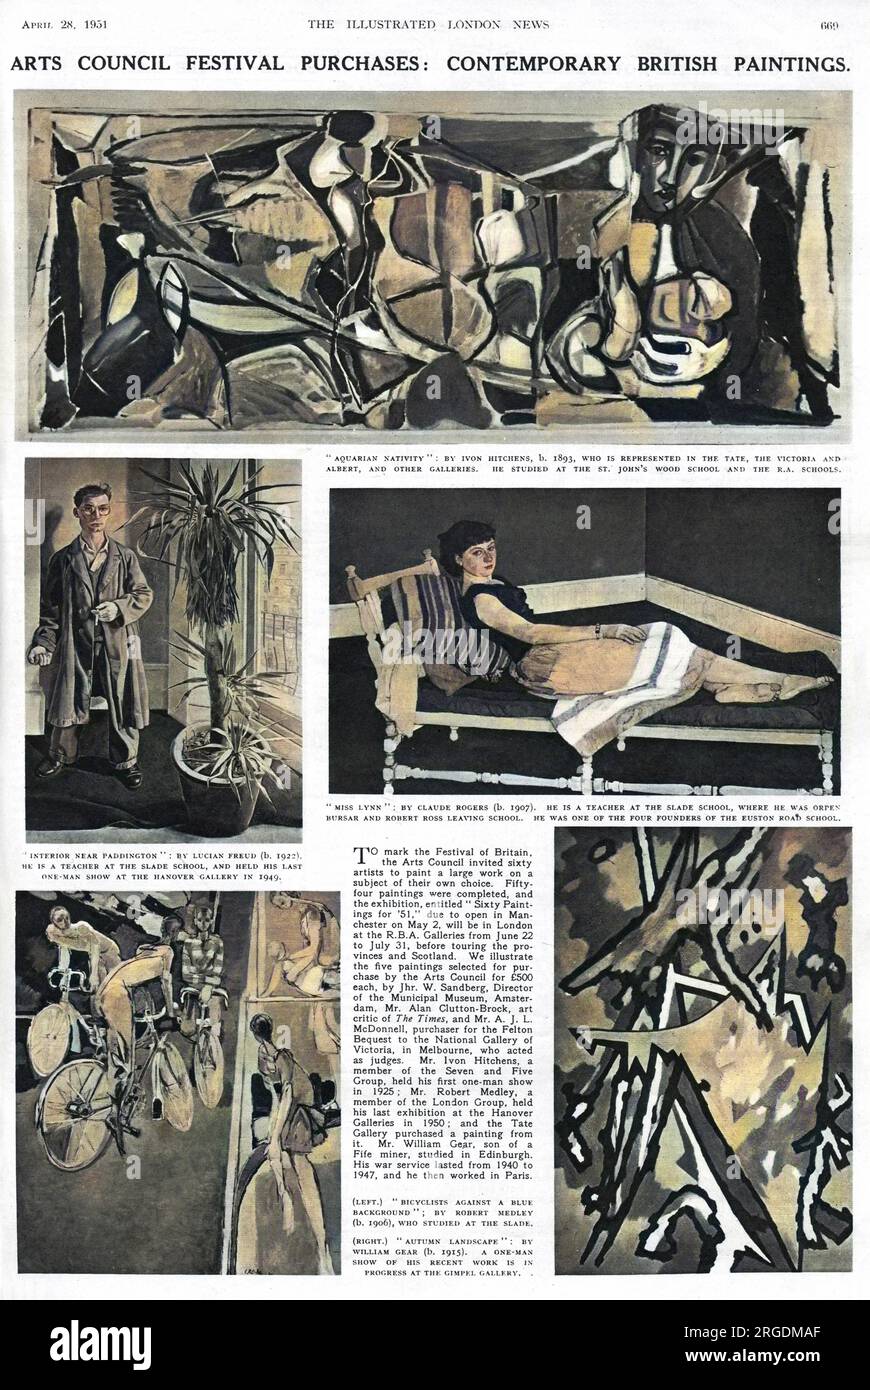 A page from the Illustrated London News, dated 28th April 1951, detailing contemporary British art purchased by the Arts Council for the Festival of Britain. Aquarian Nativity by Ivon Hitchens, Interior near Paddington by Lucian Freud, Miss Lynn by Claude Rogers, Bicyclists against a blue background by Robert Medley, and Autumn Landscape by William Gear are pictured. Stock Photo